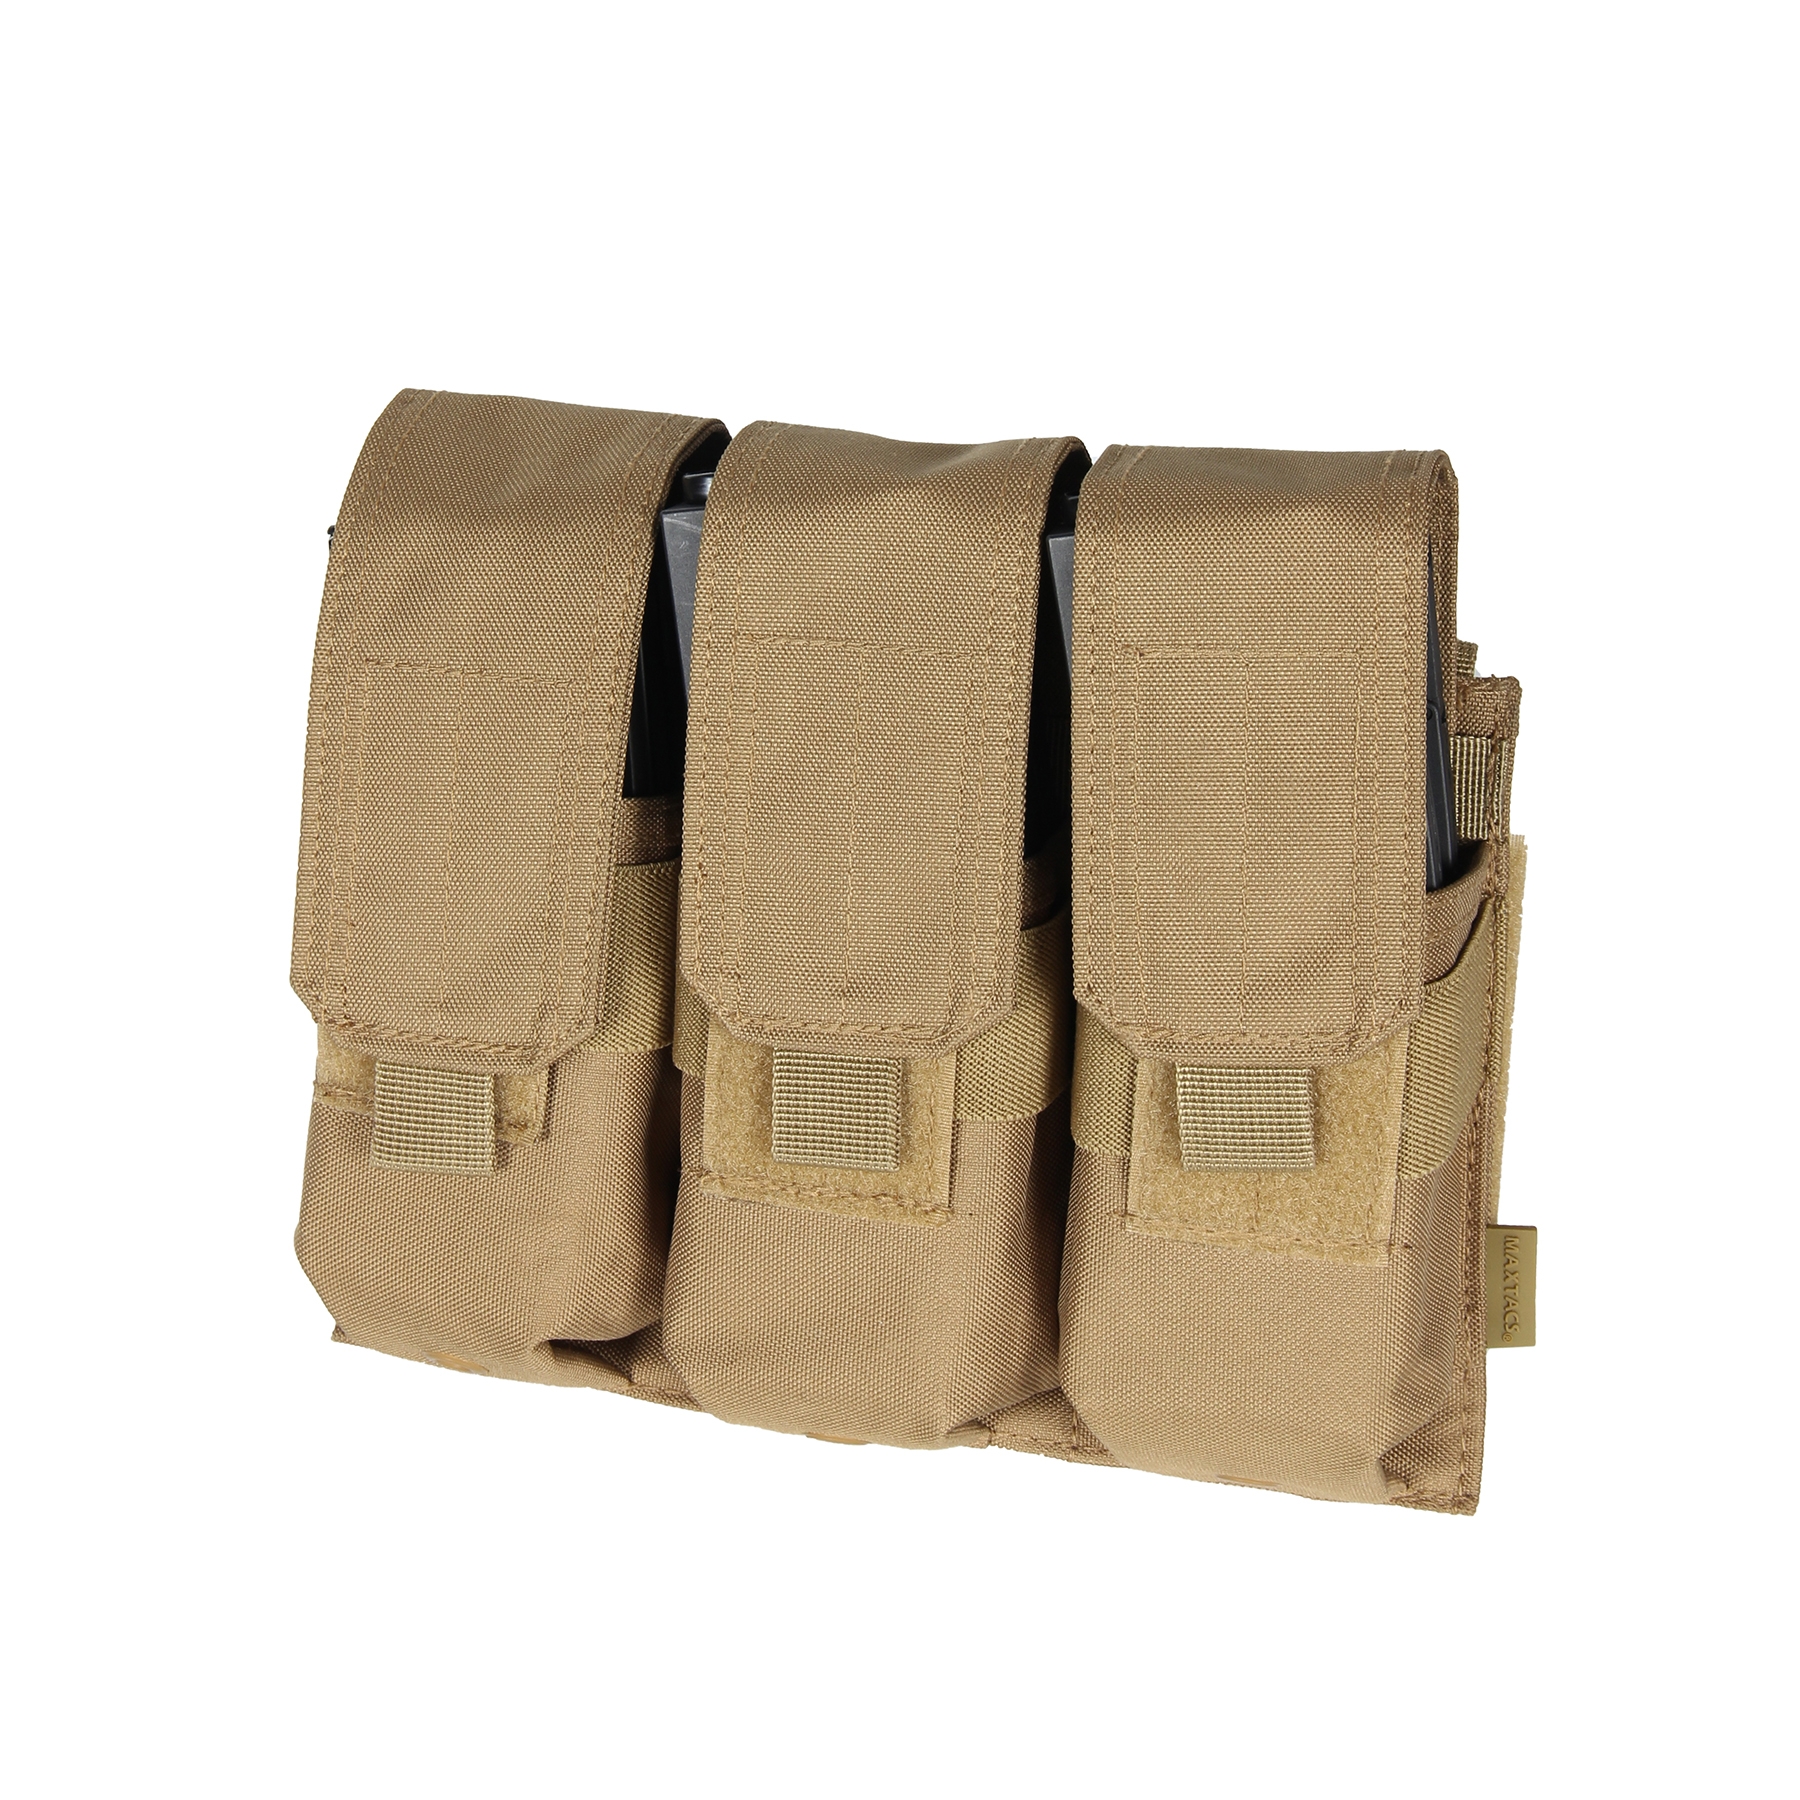 Triple Universal Rifle Mag Pouch-7388